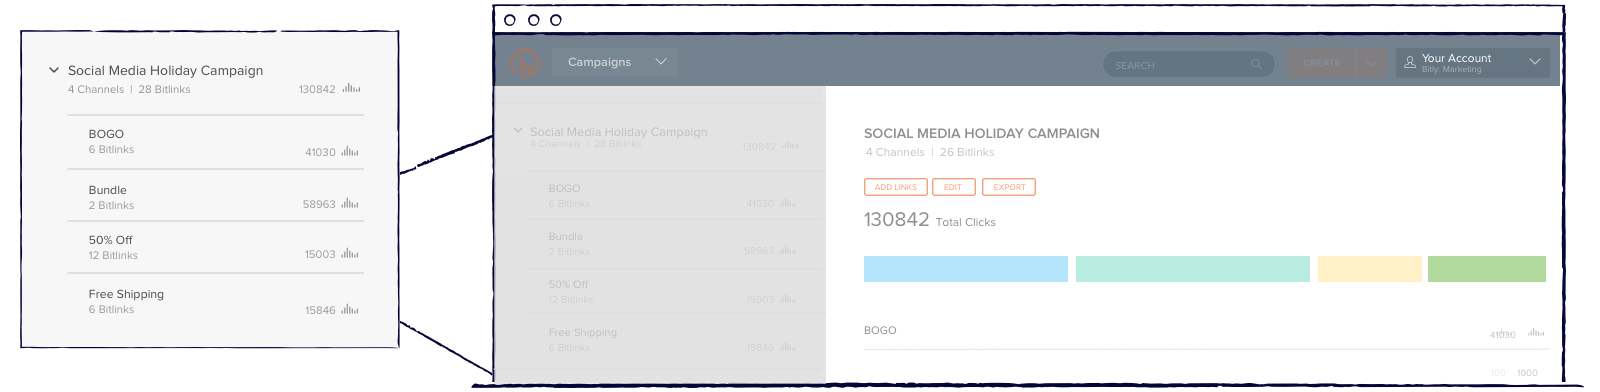 Campaigns page in a Bitly account that shows click metrics of a campaign